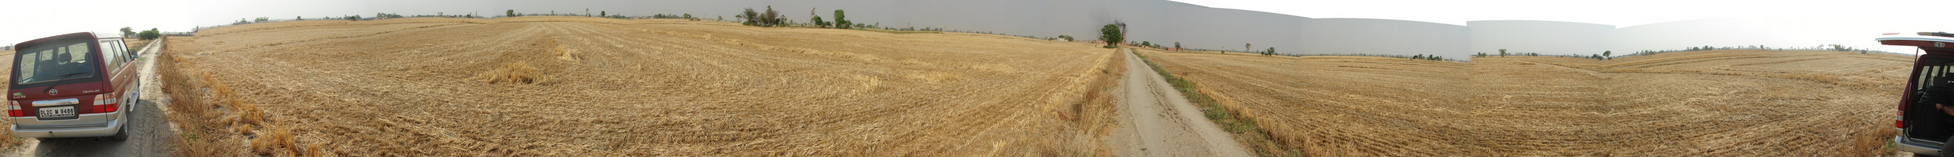 Panoramic view of the wheat fields